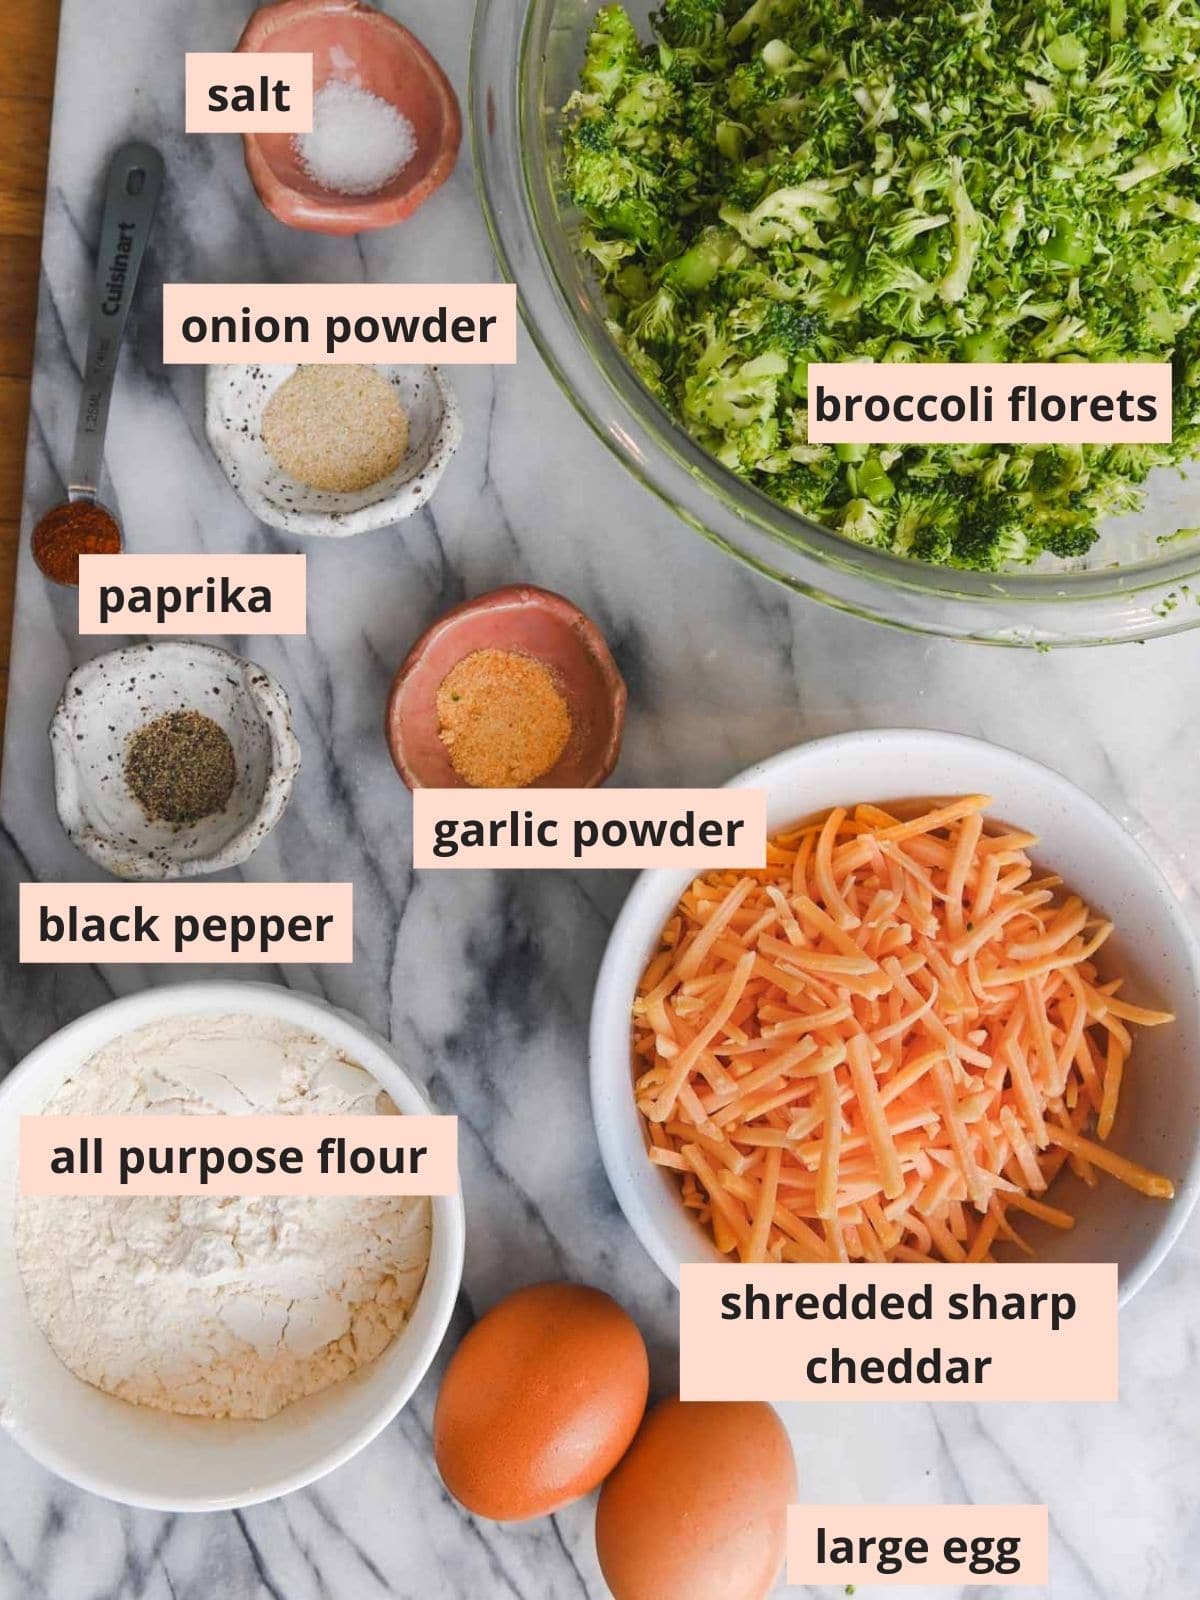 Labeled ingredients used to make broccoli fritters